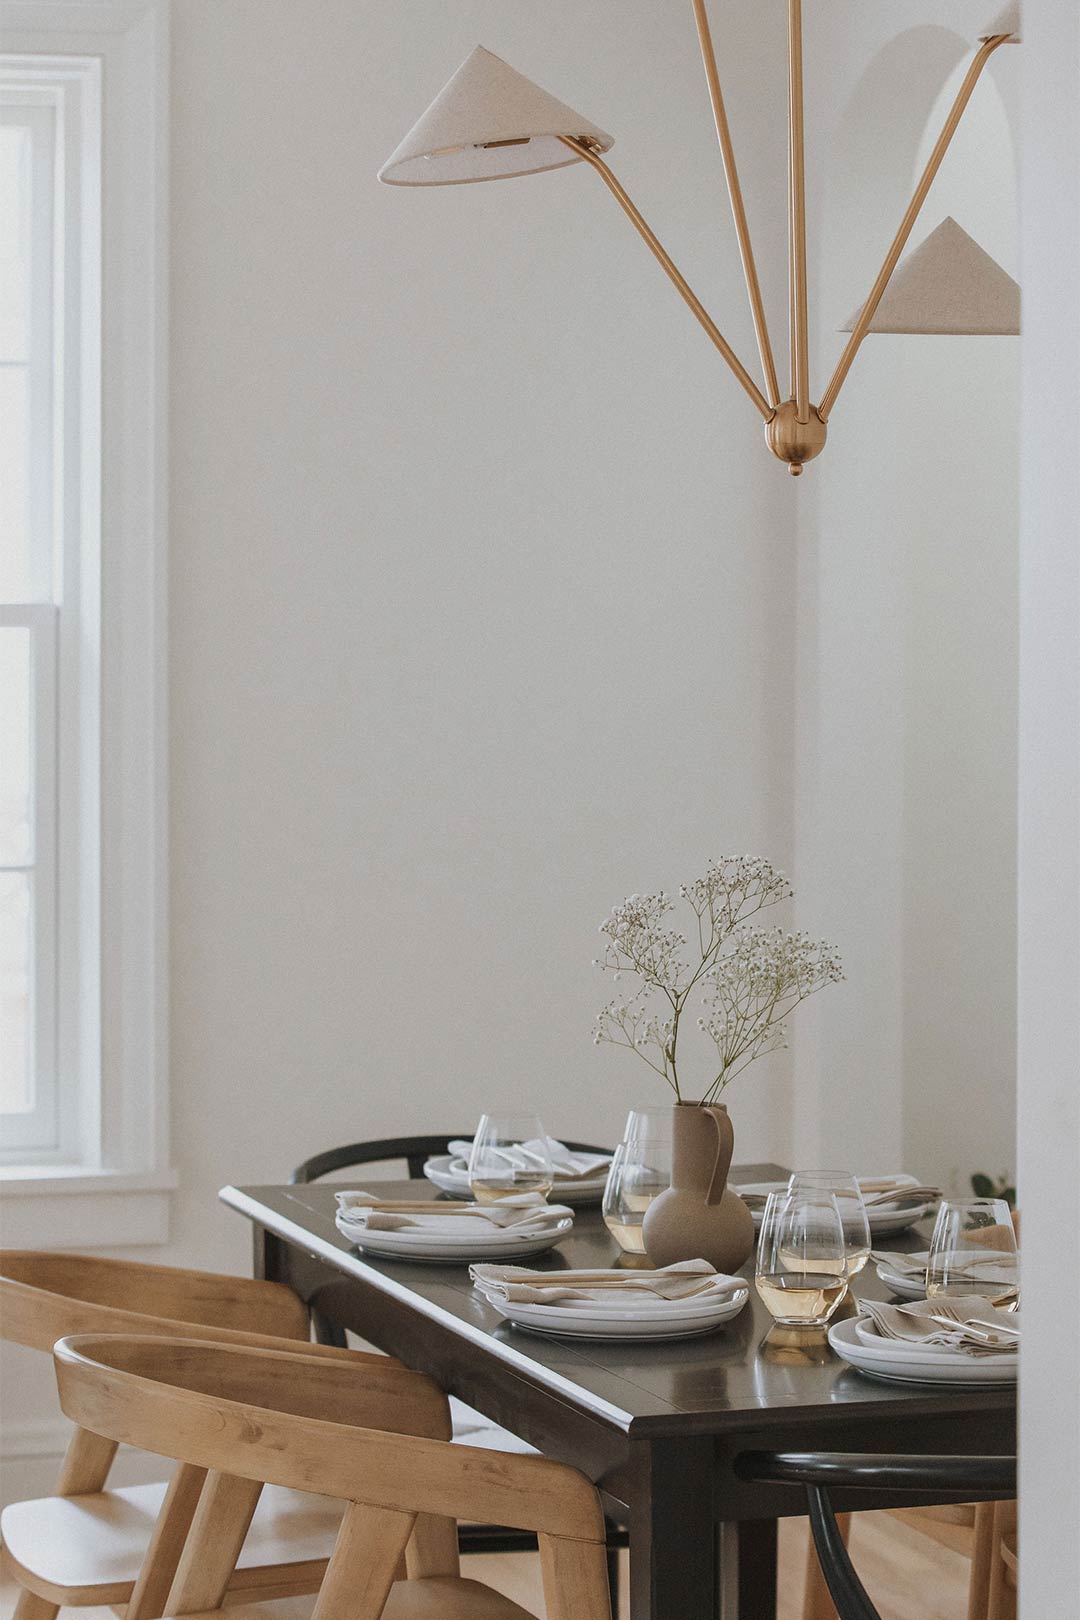 Amber Lewis for Anthropologie Mantis Chandelier paired with wishbone chairs and a dark modern dining table, styled by J. Reiko Design + Co